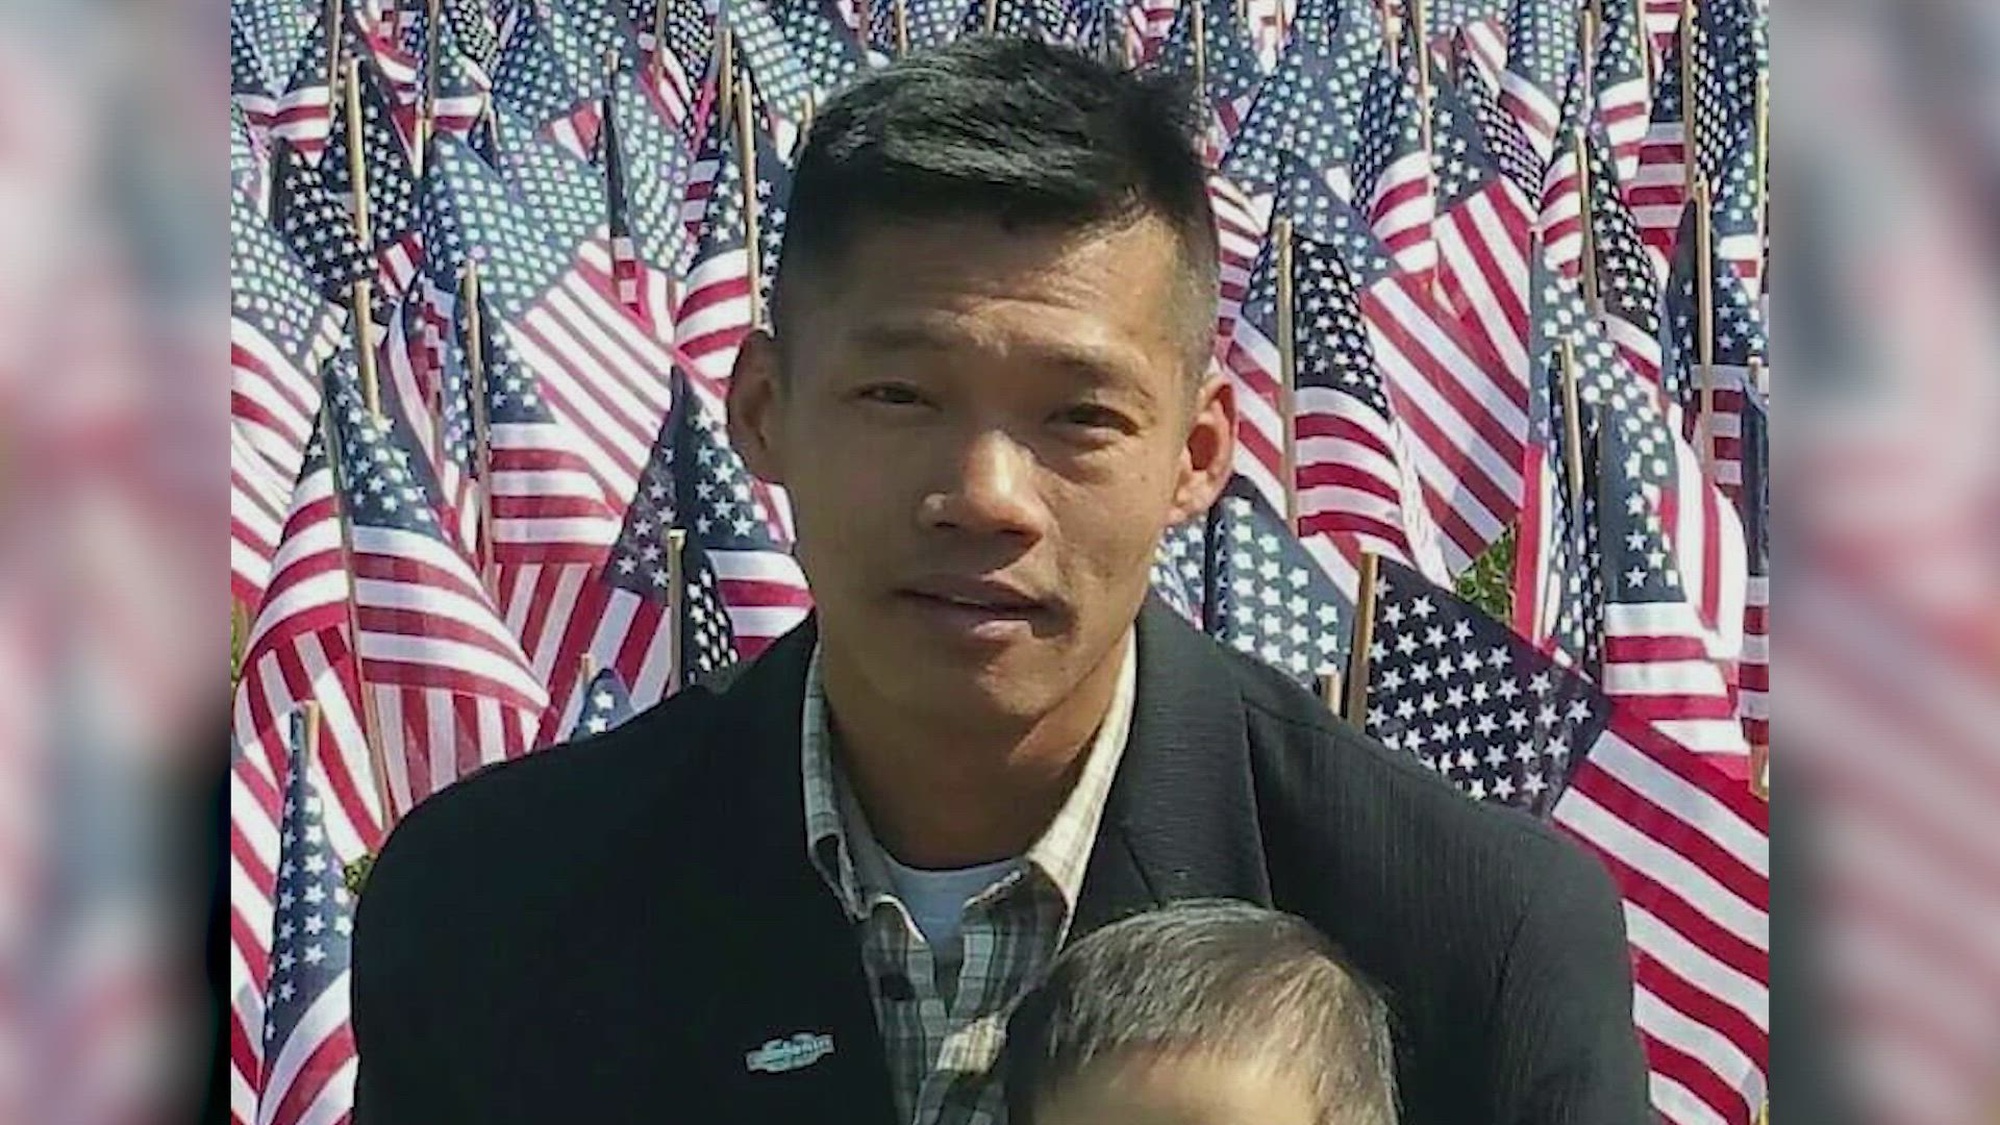 U.S. Army Sgt. 1st Class Tony Dang, civil affairs, 21st Theater Sustainment Command, tells us about his experience as an Asian American in the U.S. Army, on Panzer-Kaserne, Germany on May 21, 2024.